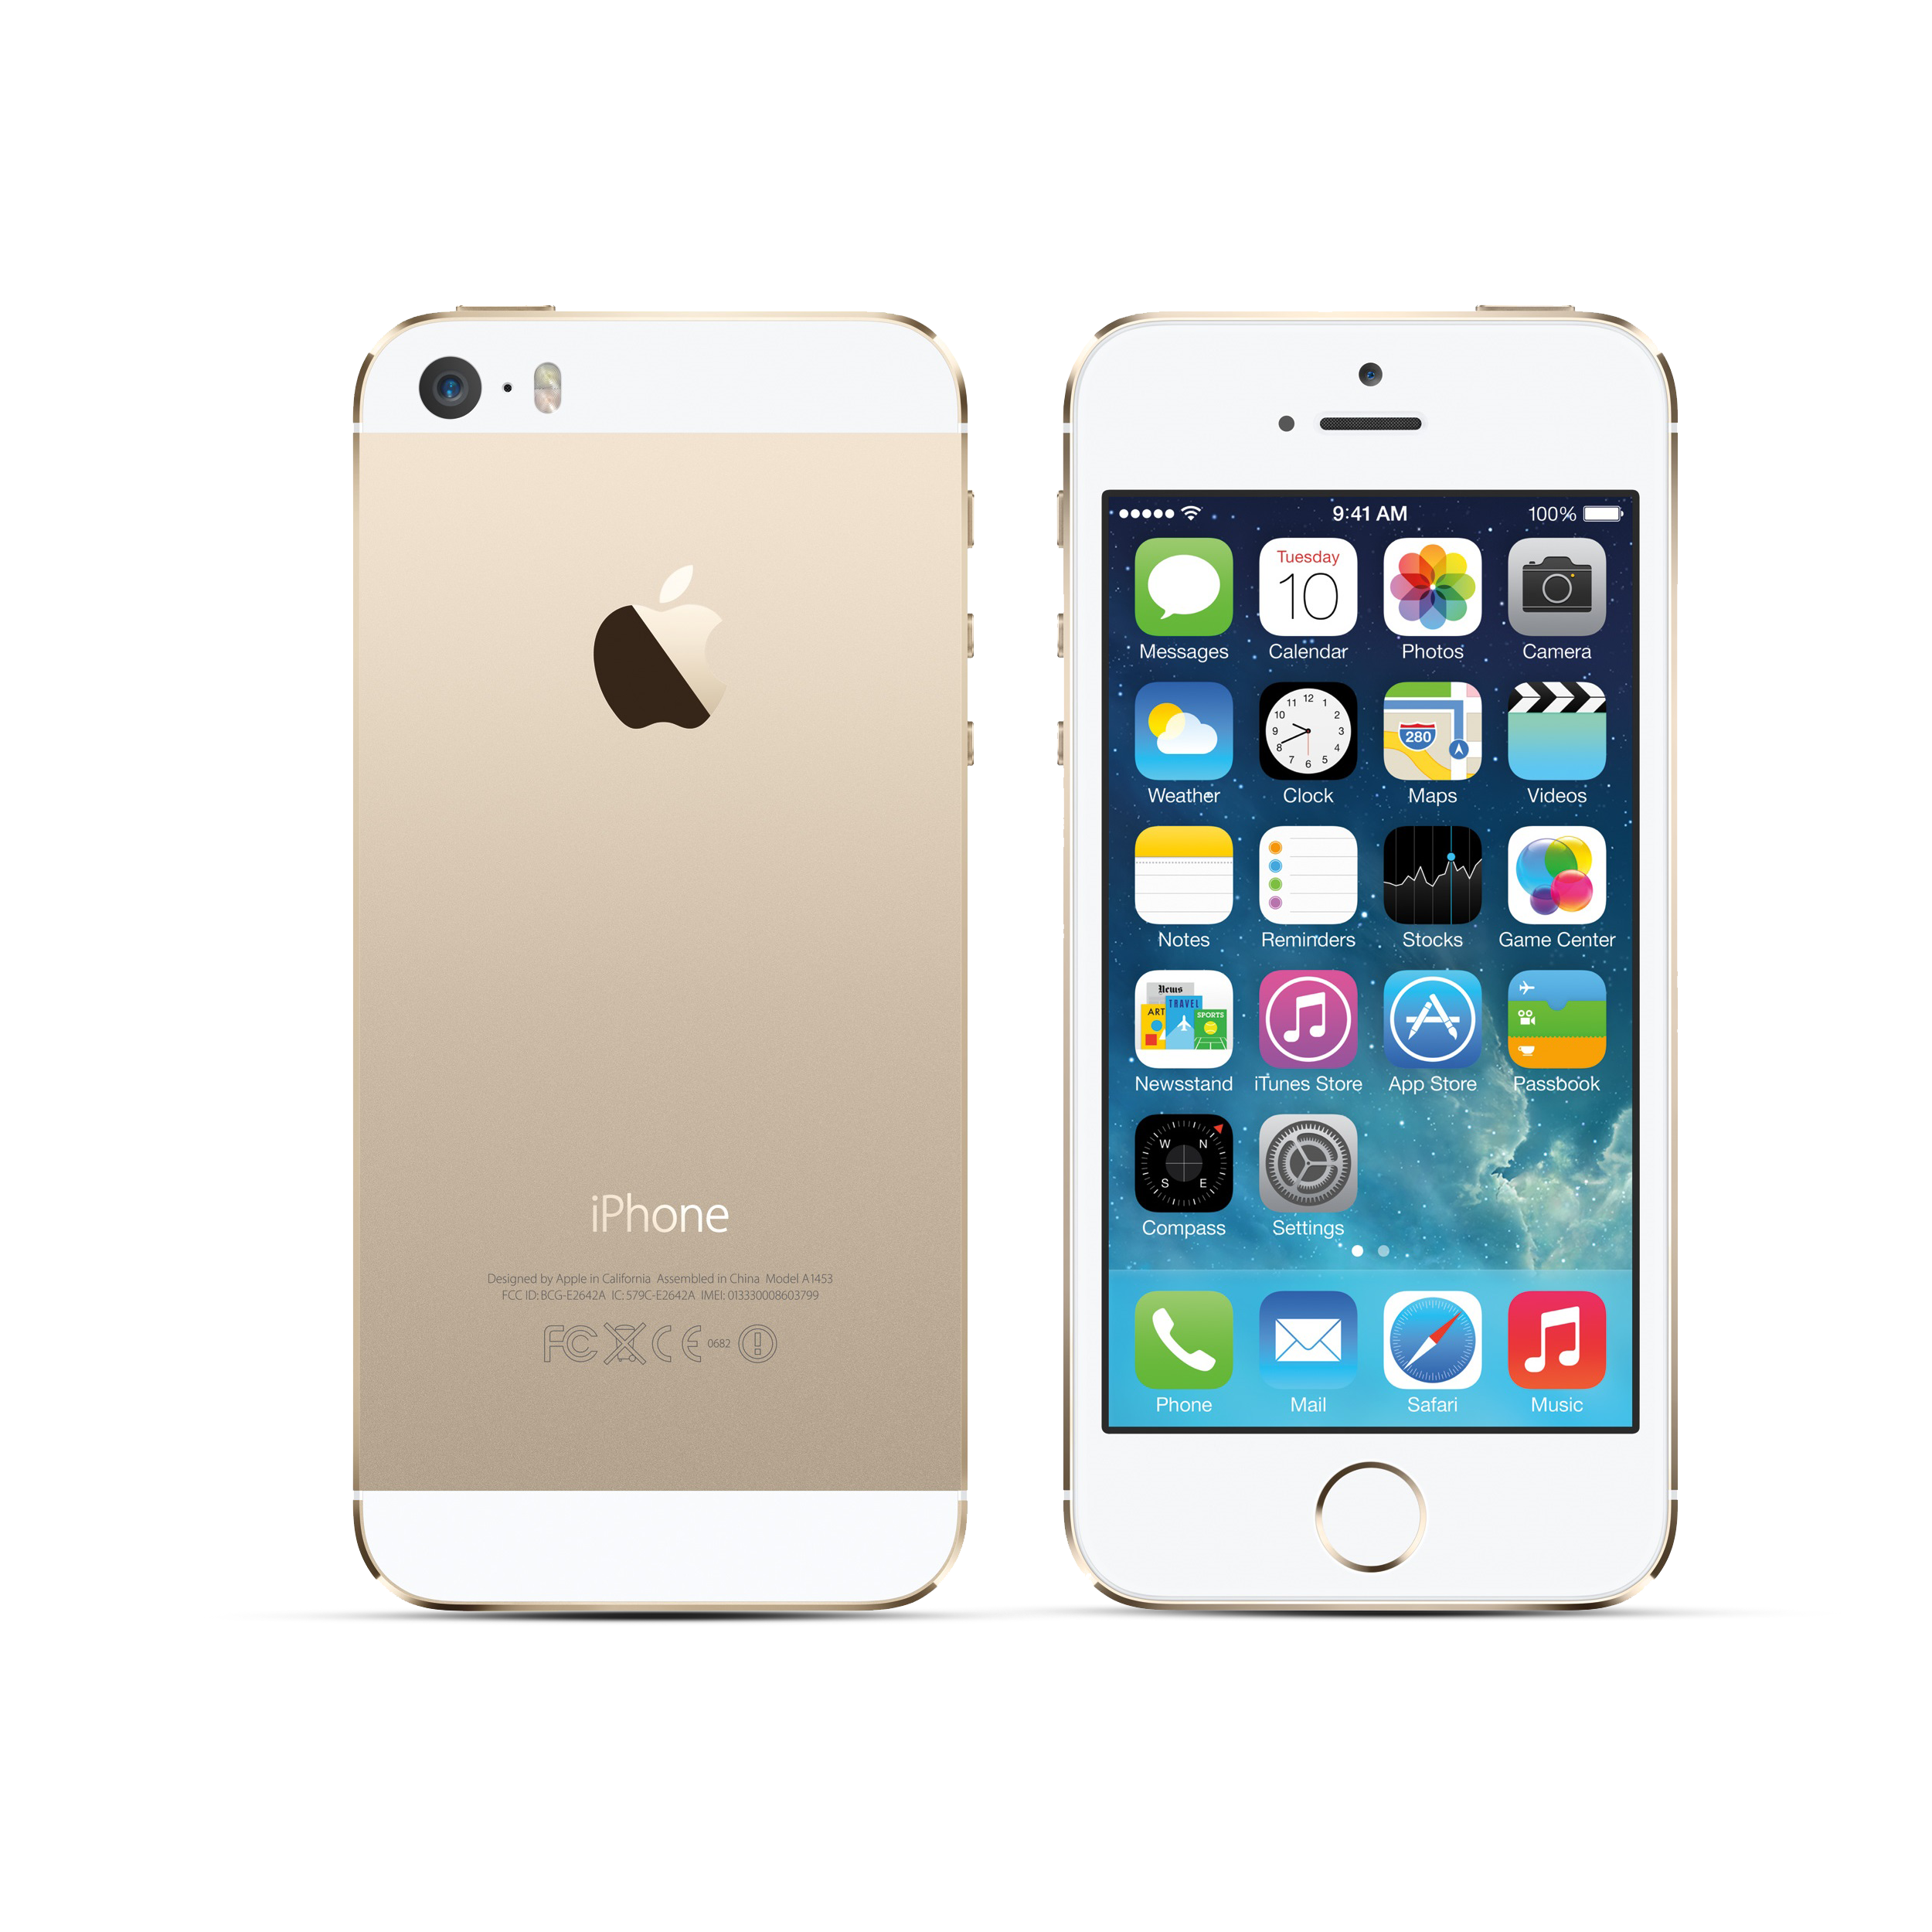 Fully Refurbished iPhone 5s.